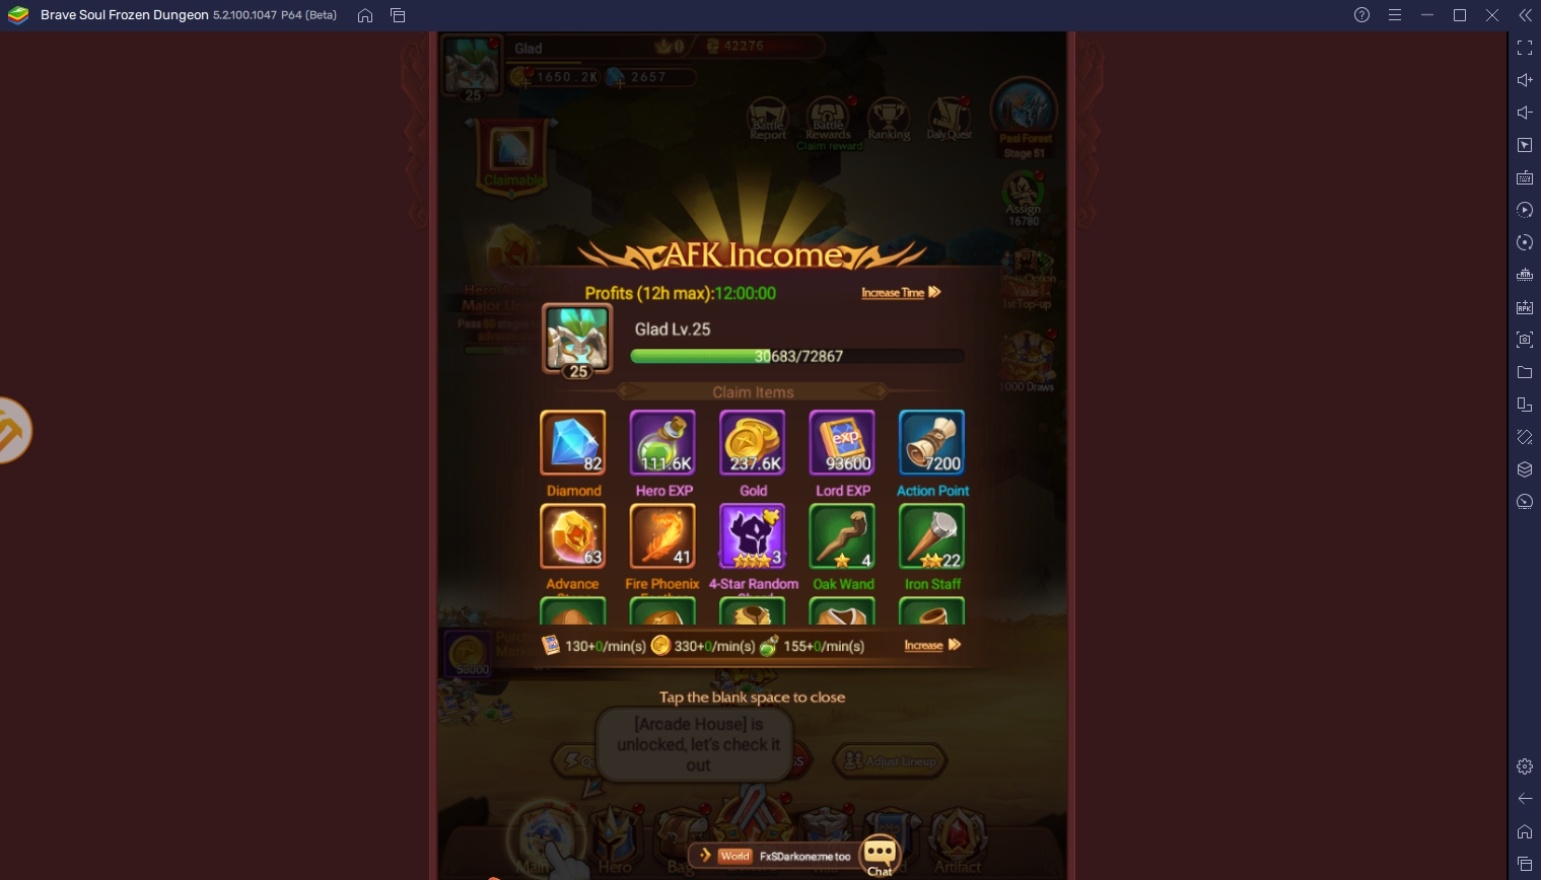 BlueStacks' Beginners Guide to Playing Brave Soul: Frozen Dungeon